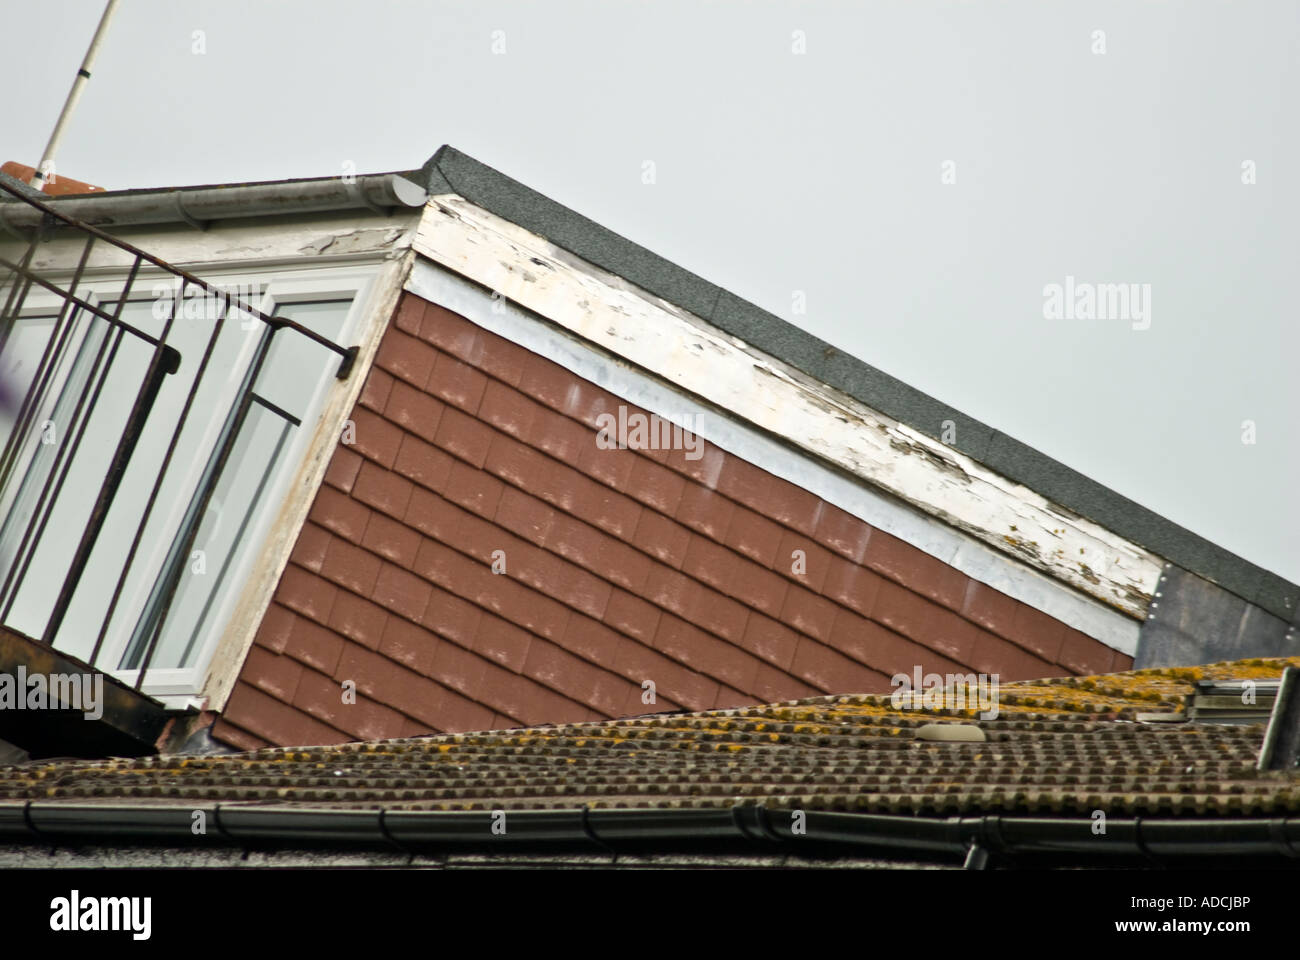 BADLY REPAIRED DORMA ROOF Stock Photo